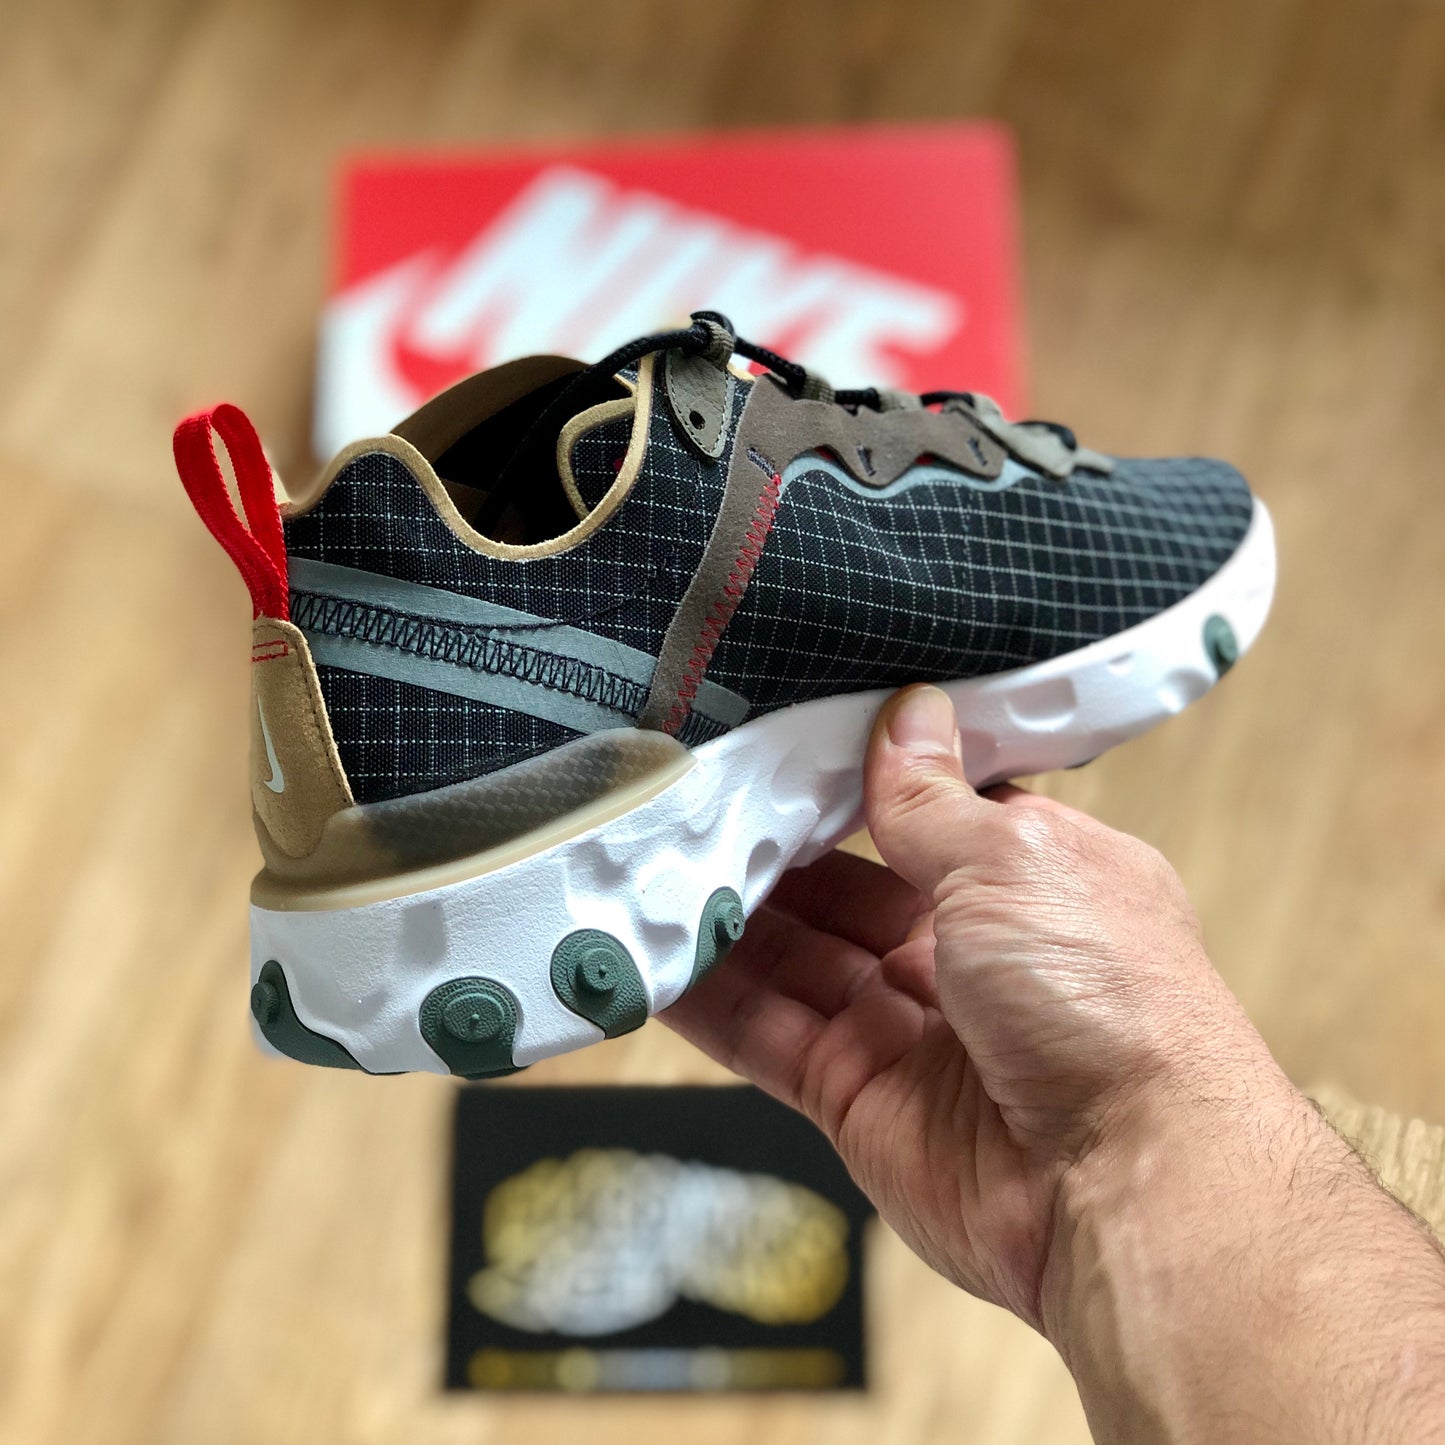 Nike React Element 55 - Size? Exclusive